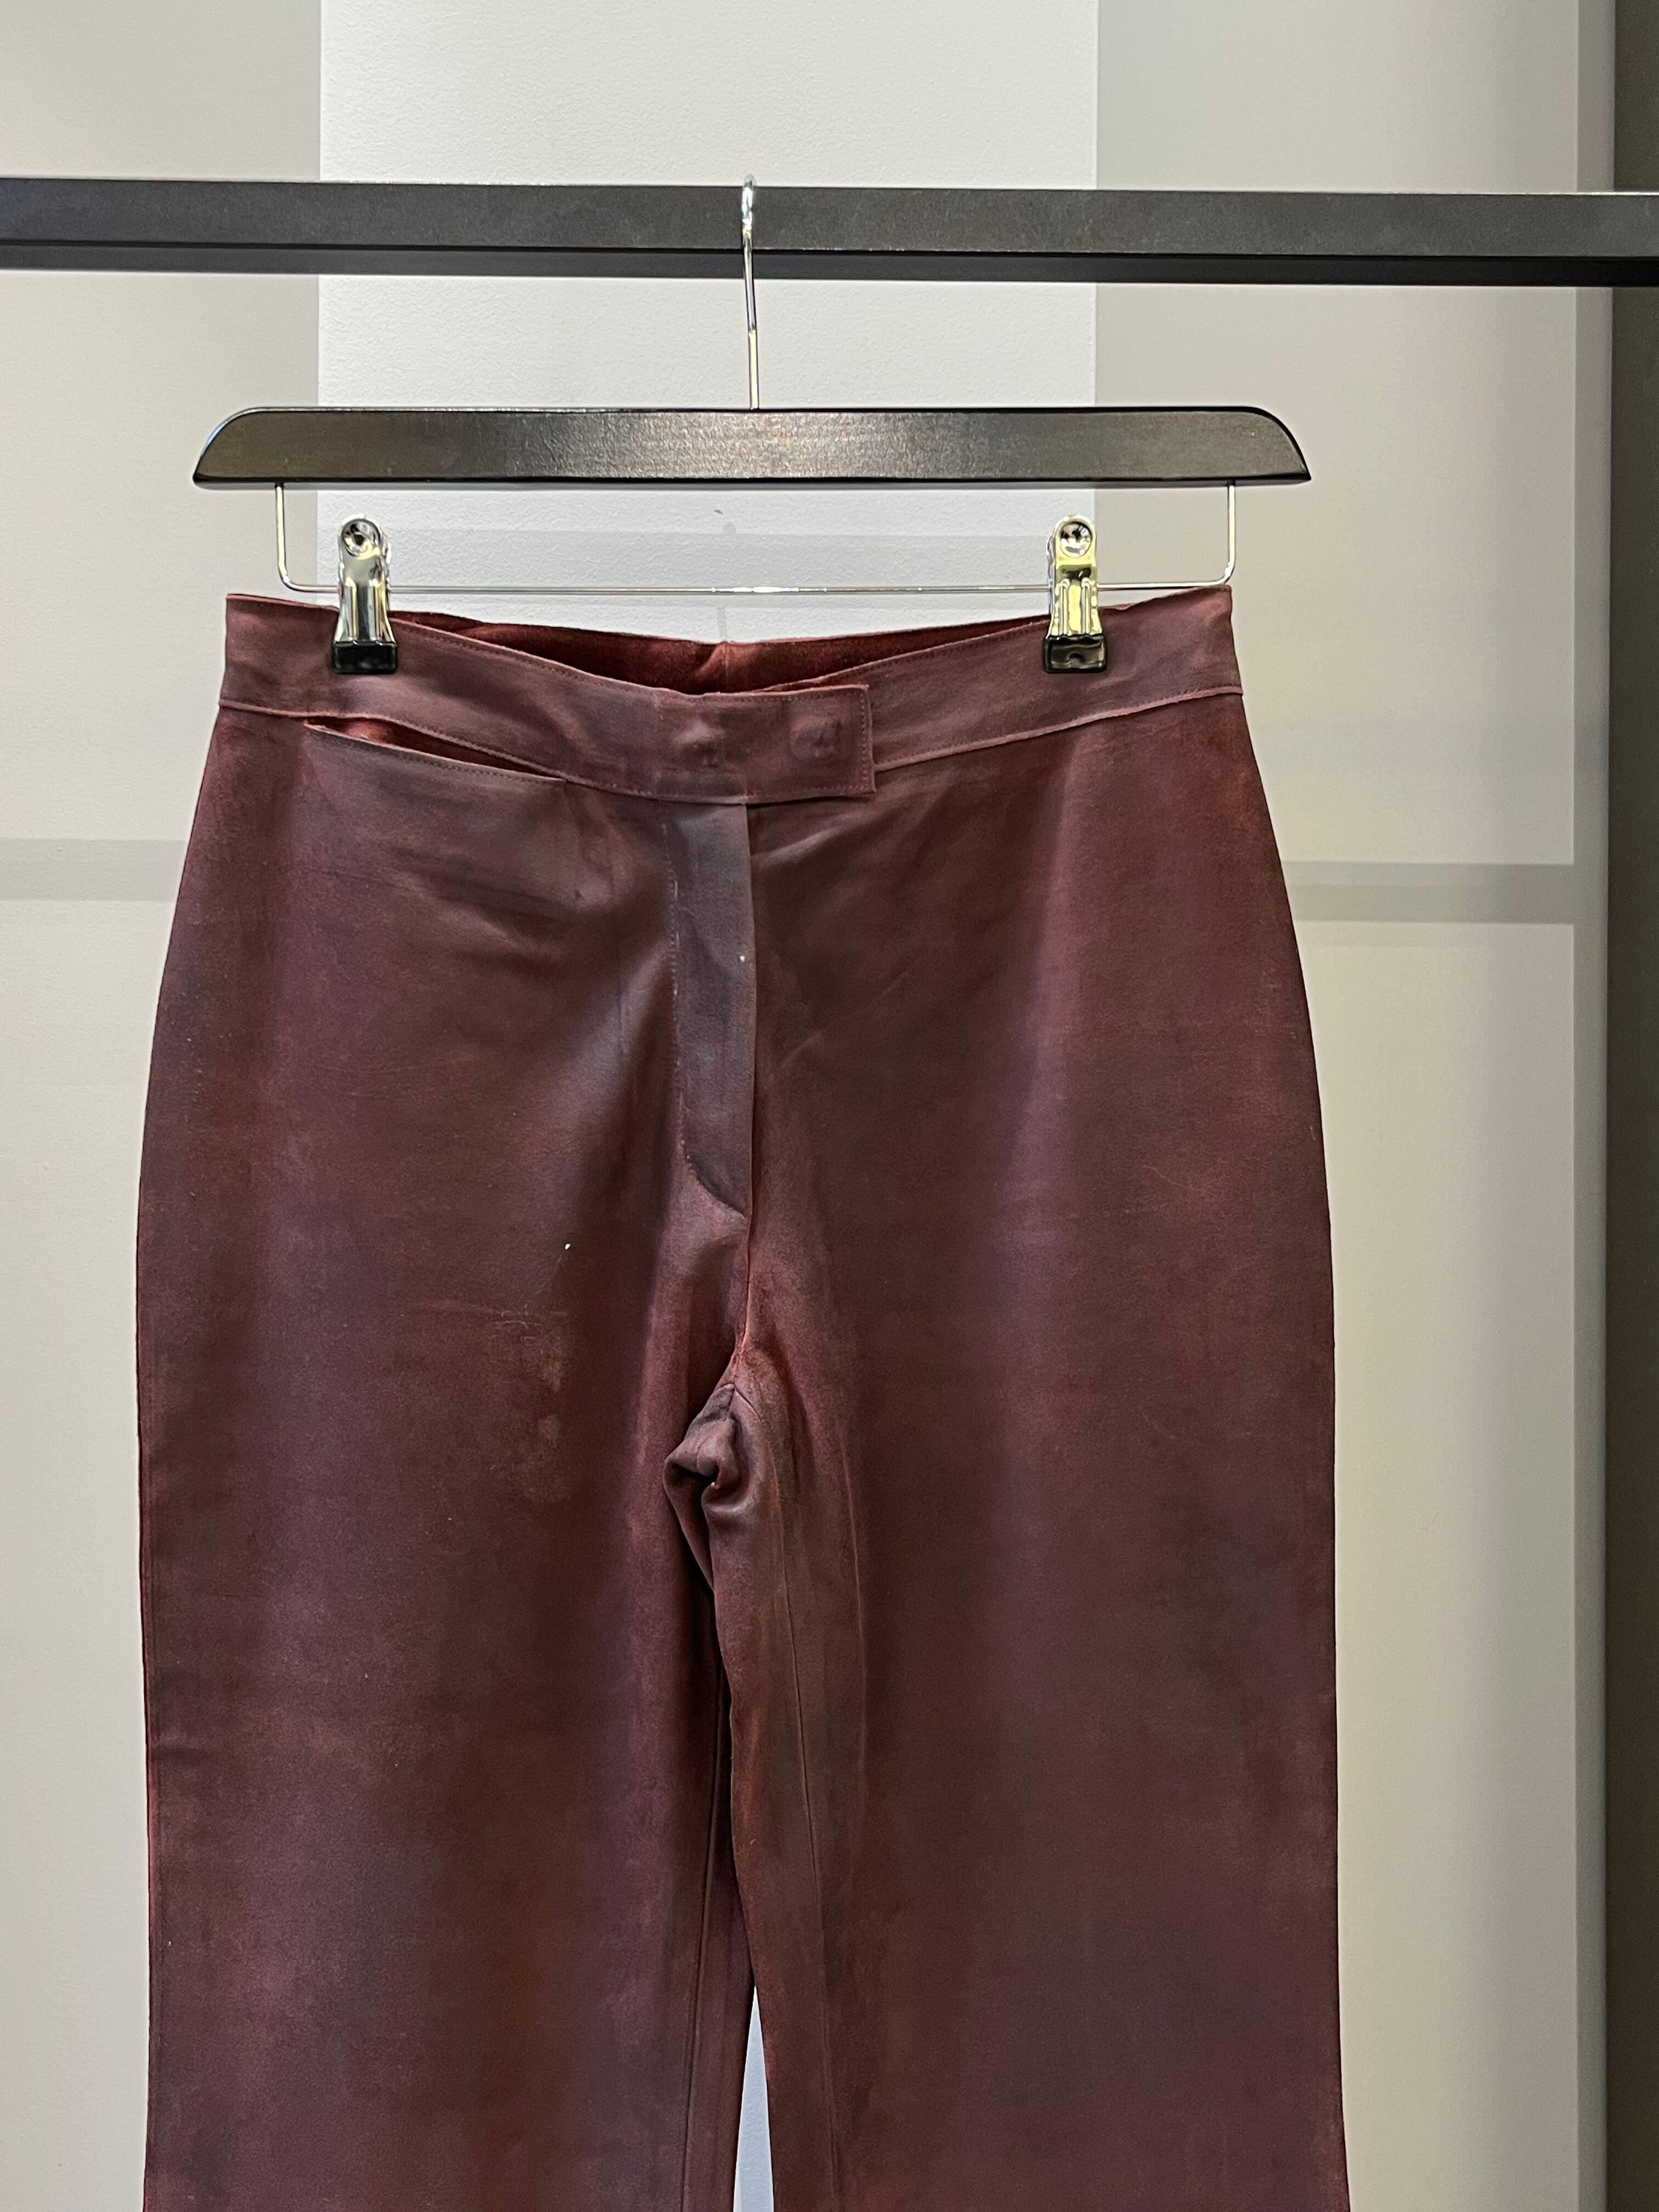 Miu Miu
Leather Brown Pants
Size IT 40

Beautiful Miu Miu leather brown pants in a size IT 40. In great condition, made in Italy.

✈️ EU & US will be shipped with UPS Expedited which usually takes about 2-4 working days to arrive. Orders over $500+